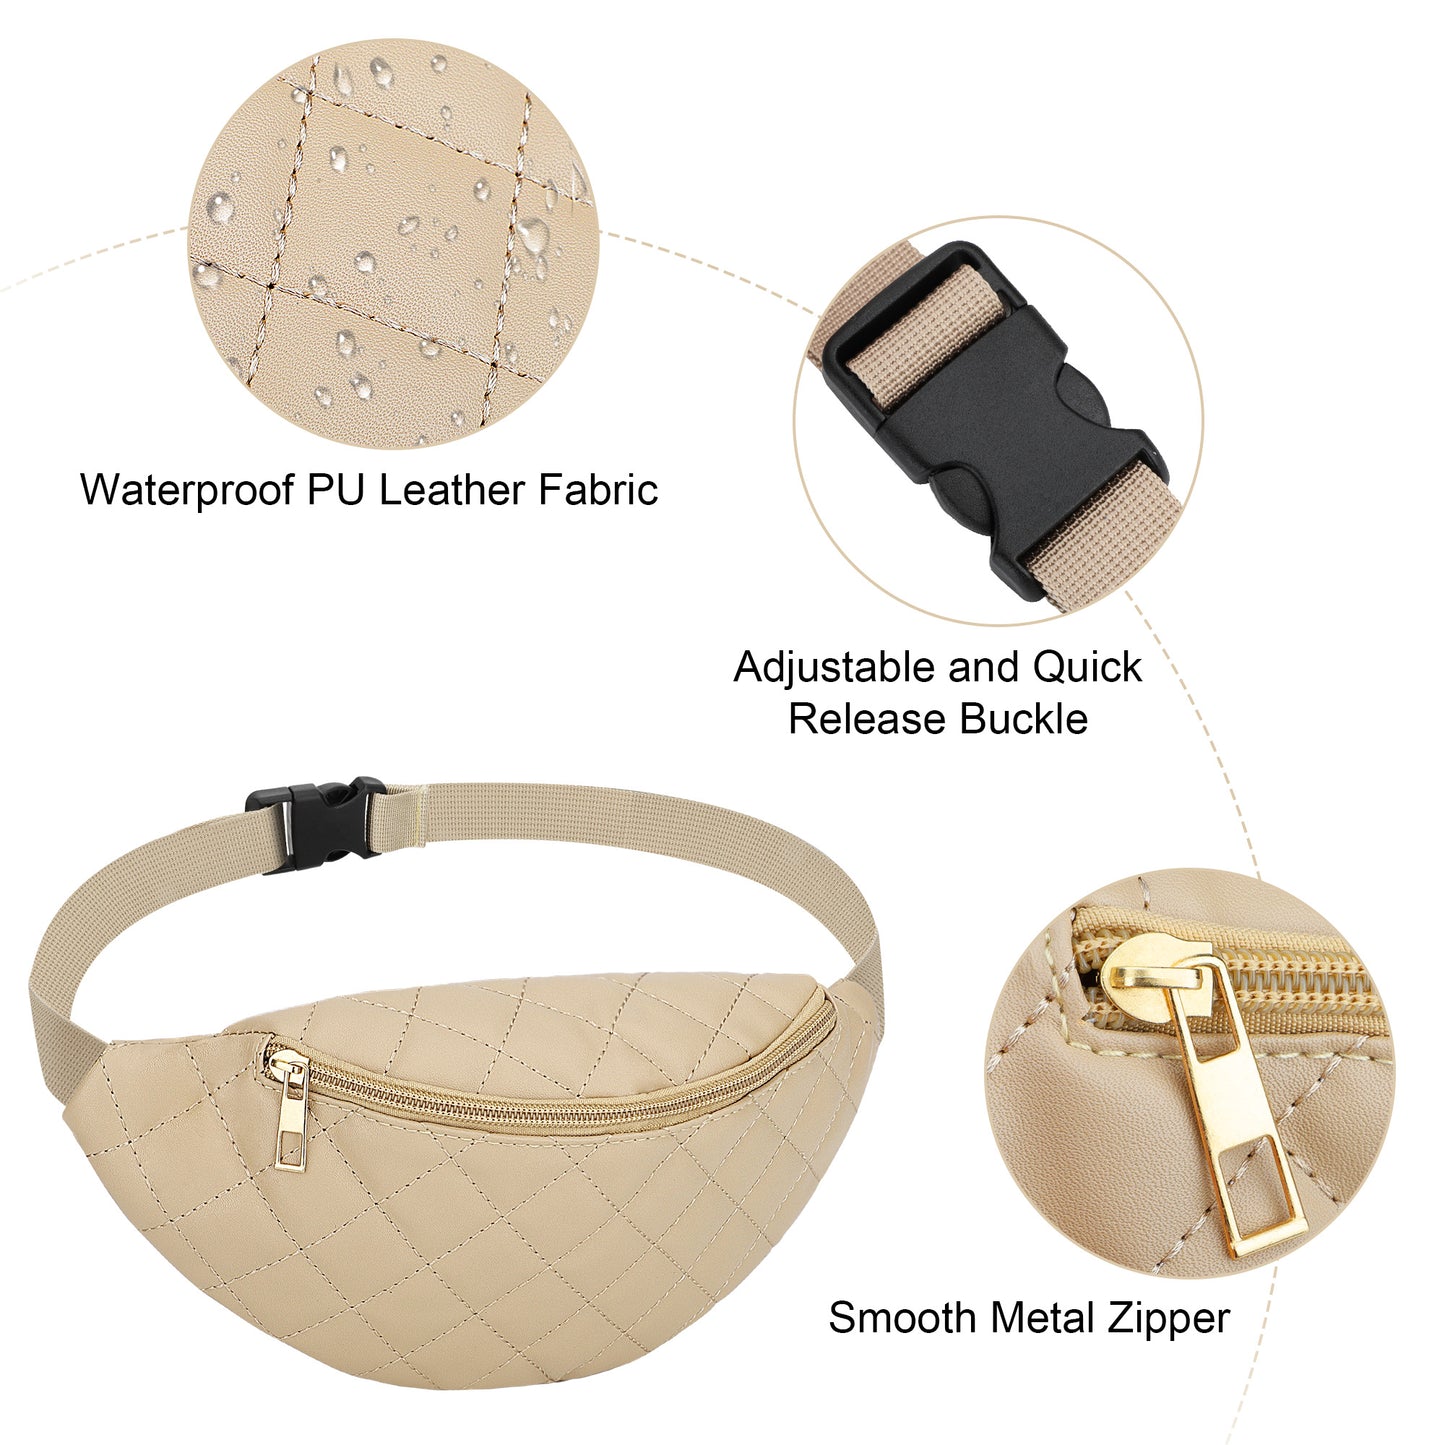 Fashion Women Plaid Waist Bag - Female PU Leather Belt Bags Shoulder Crossbody Chest Bag Fanny Pack Banana Hip Purse for Sports Workout Traveling Running Casual (Beige)